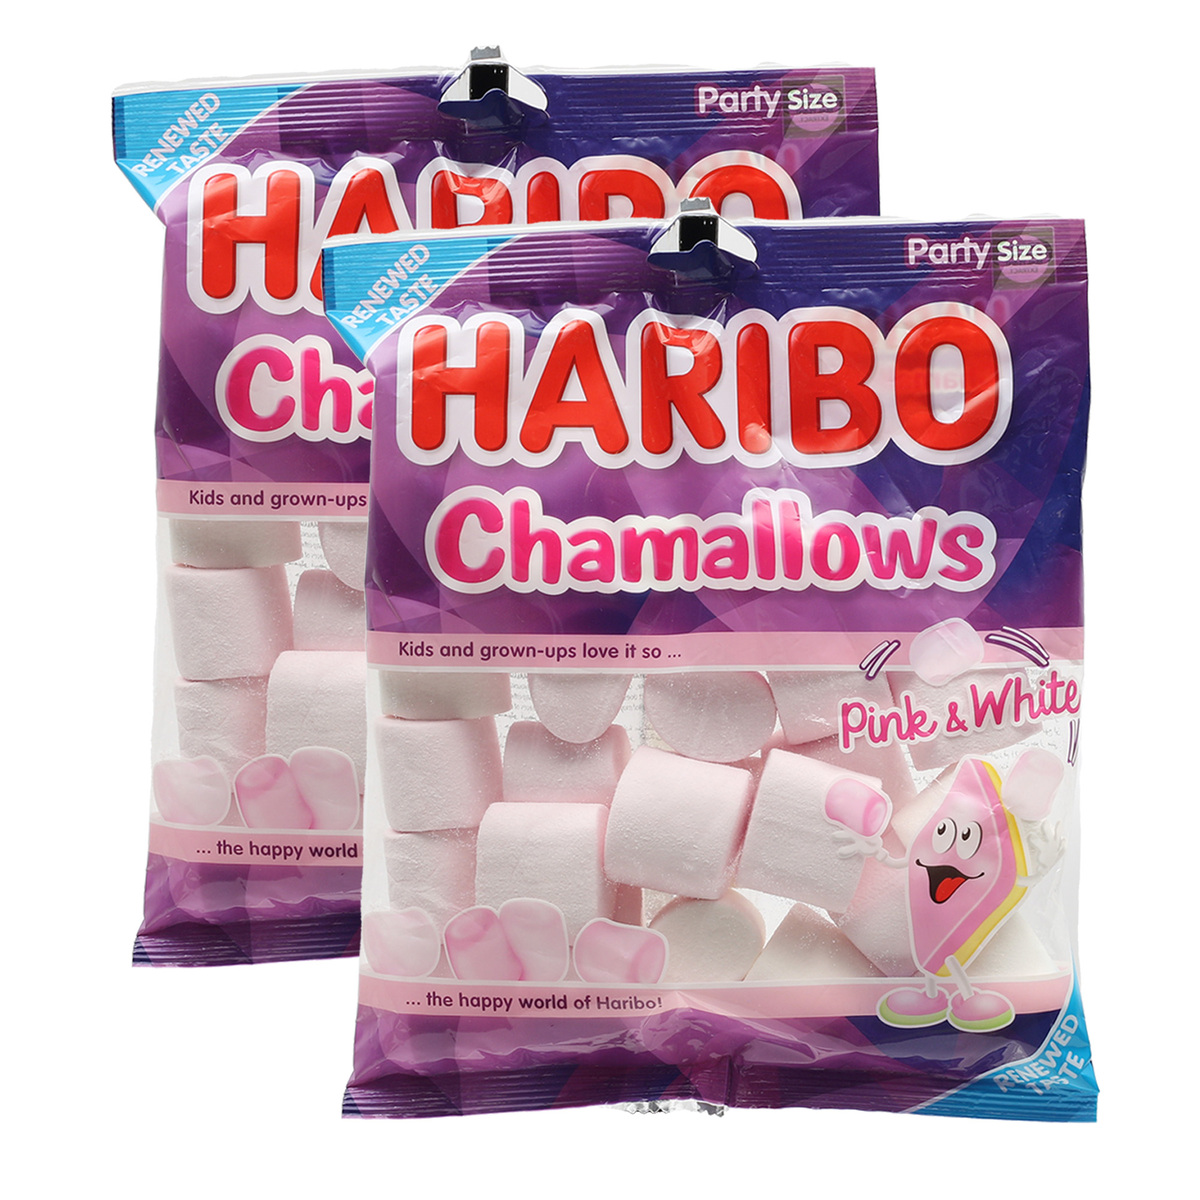 2 Bags Of Haribo Chamallows Mix Marshmallow Gummies -450 G In Total- 